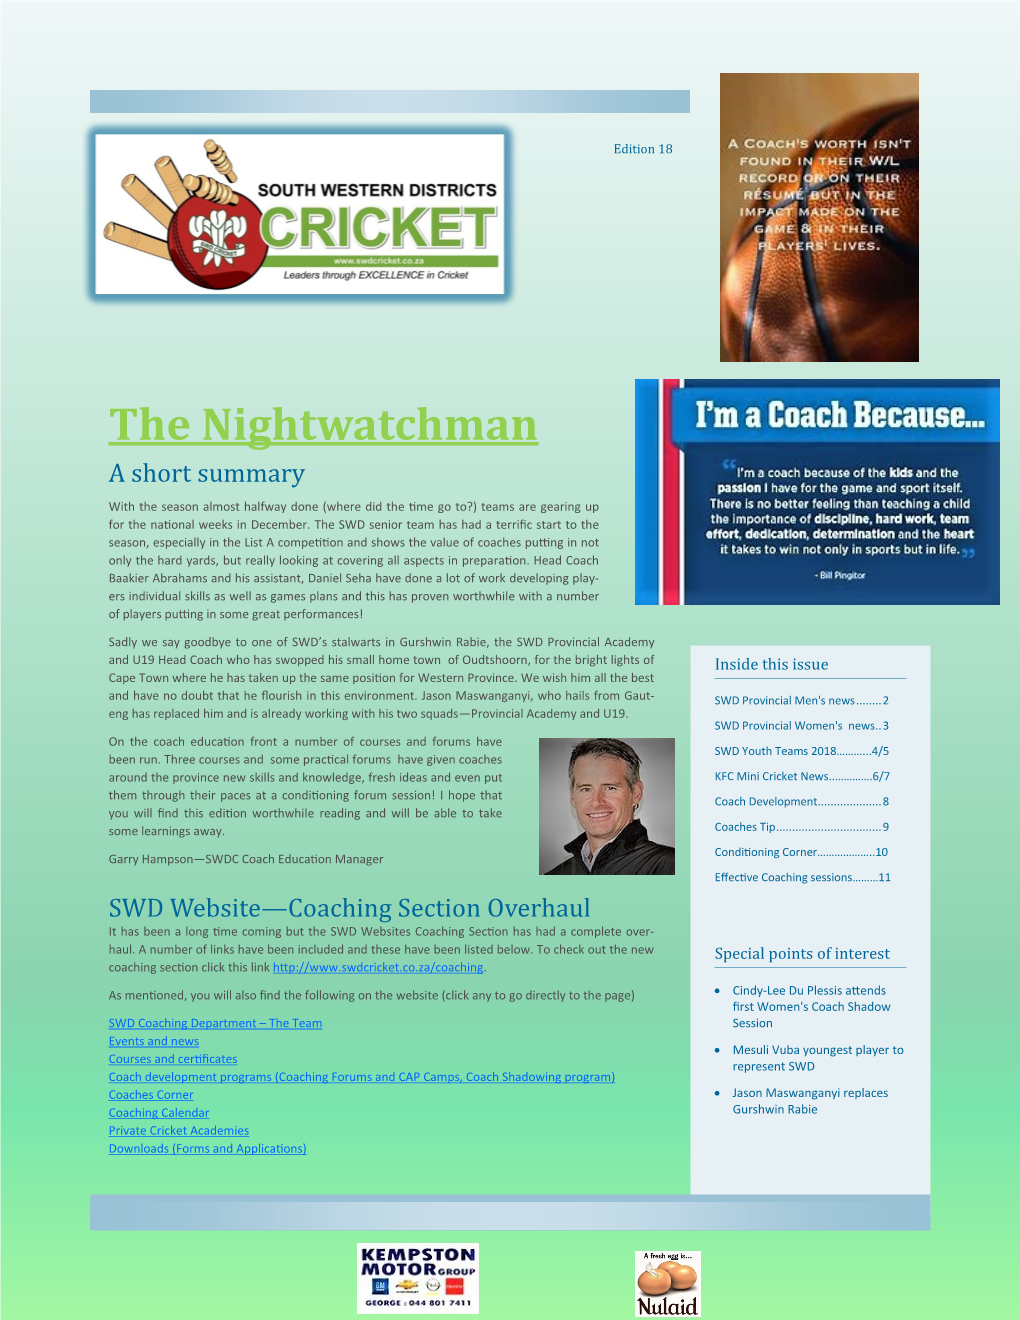 The Nightwatchman a Short Summary with the Season Almost Halfway Done (Where Did the Time Go To?) Teams Are Gearing up for the National Weeks in December